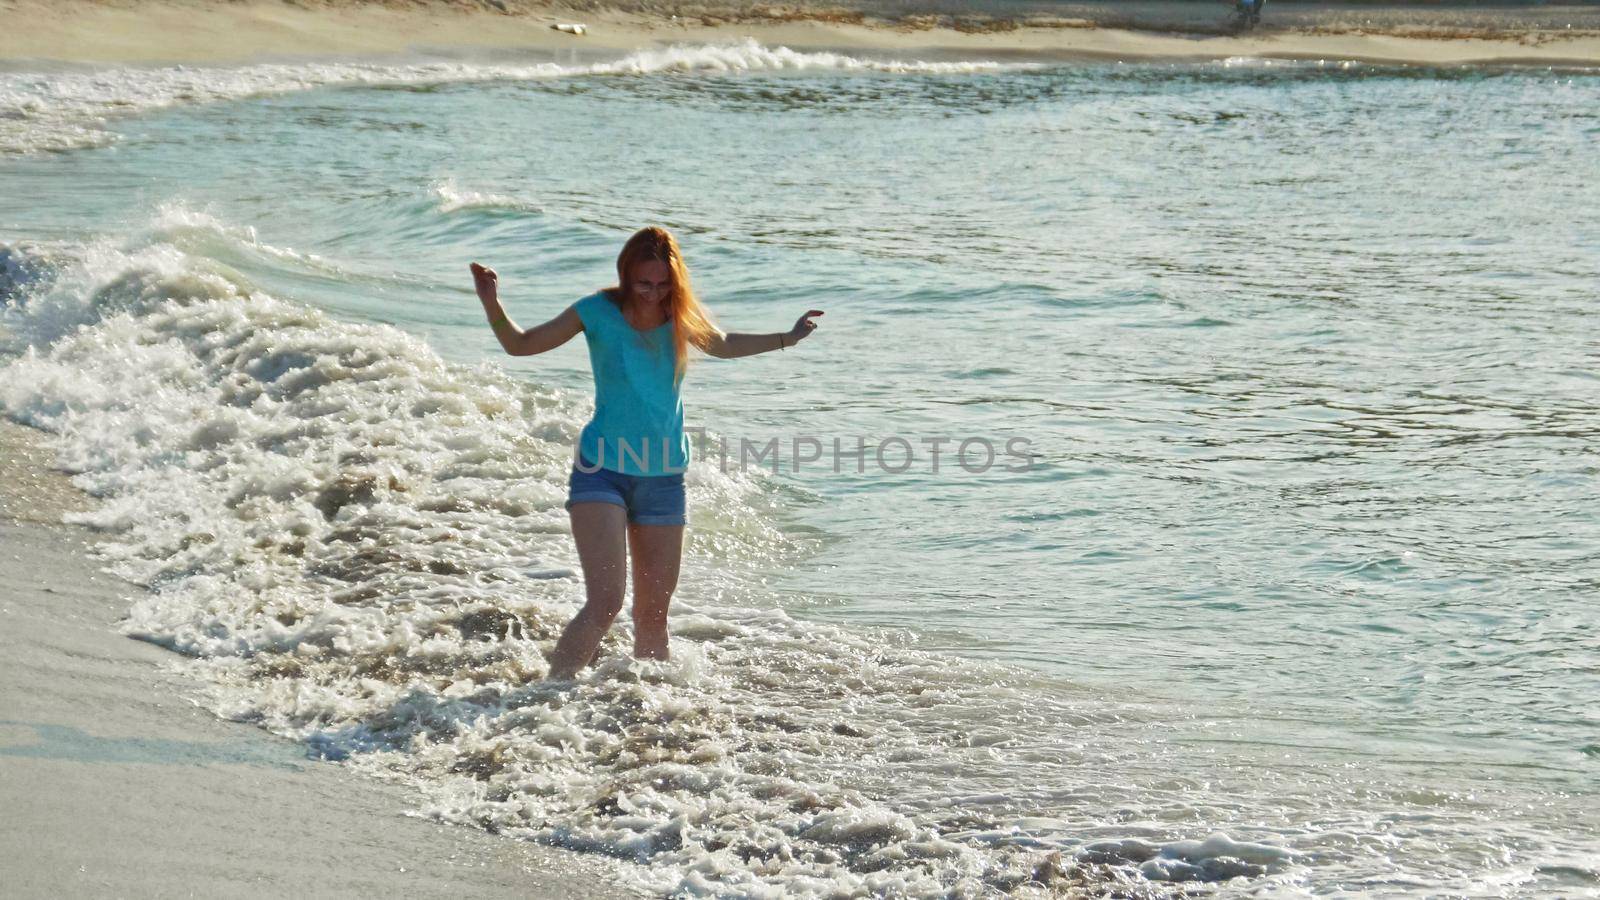 Young woman with long red hair play waves, seascape beach of Dominican Republic, Caribbean sea